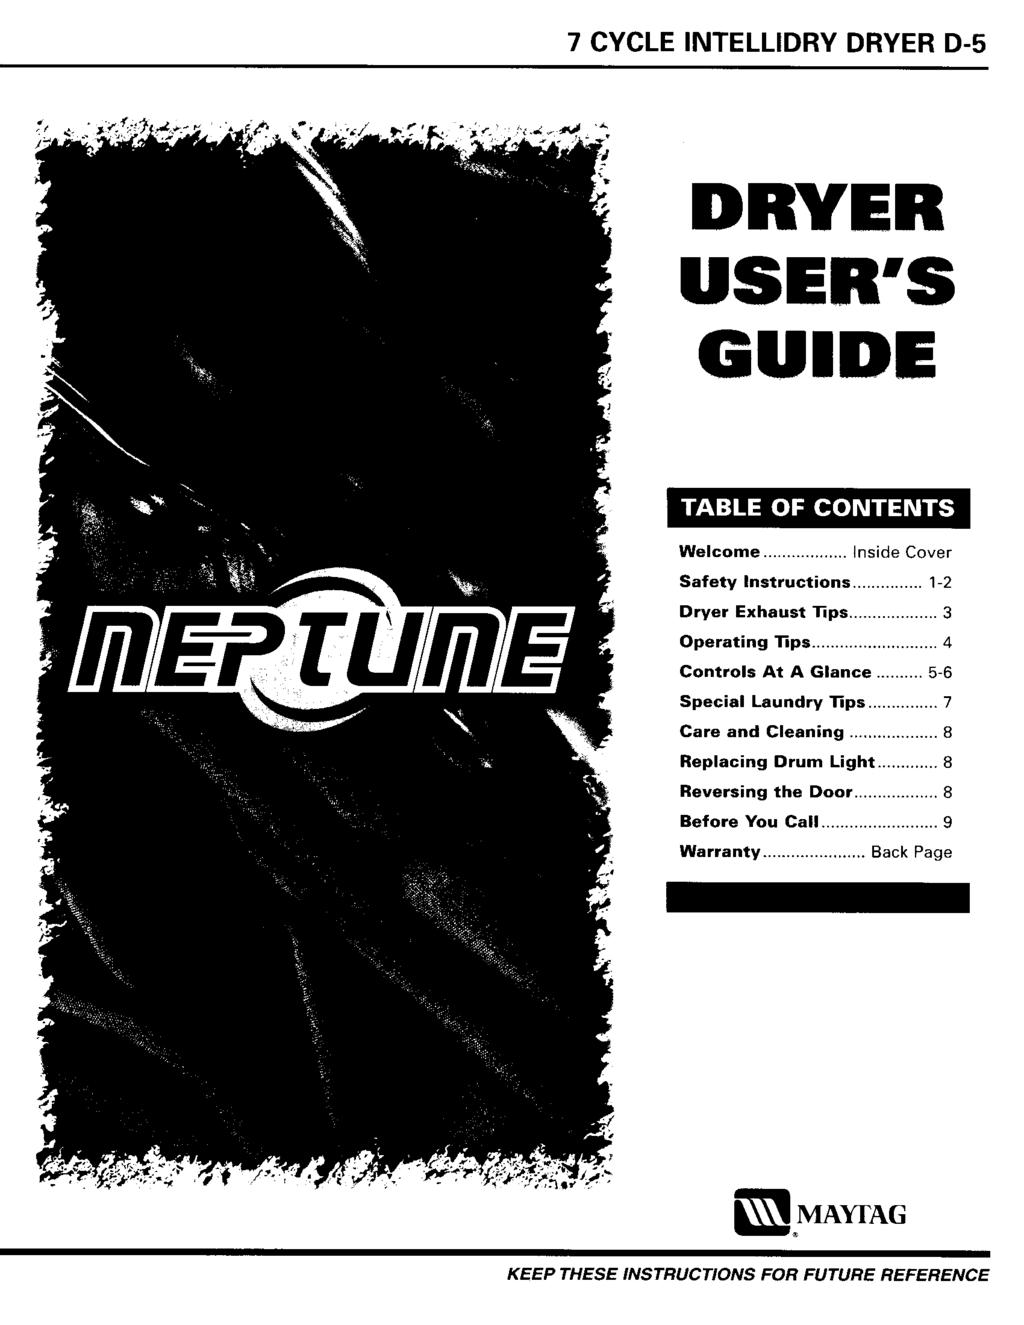 7 CYCLE INTELLIDRY DRYER D-5 DRYER USER'S GUIDE Welcome... Inside Cover Safety Instructions... 1-2 Dryer Exhaust _ps... 3 Operating 31ps... 4 Controls At A Glance.